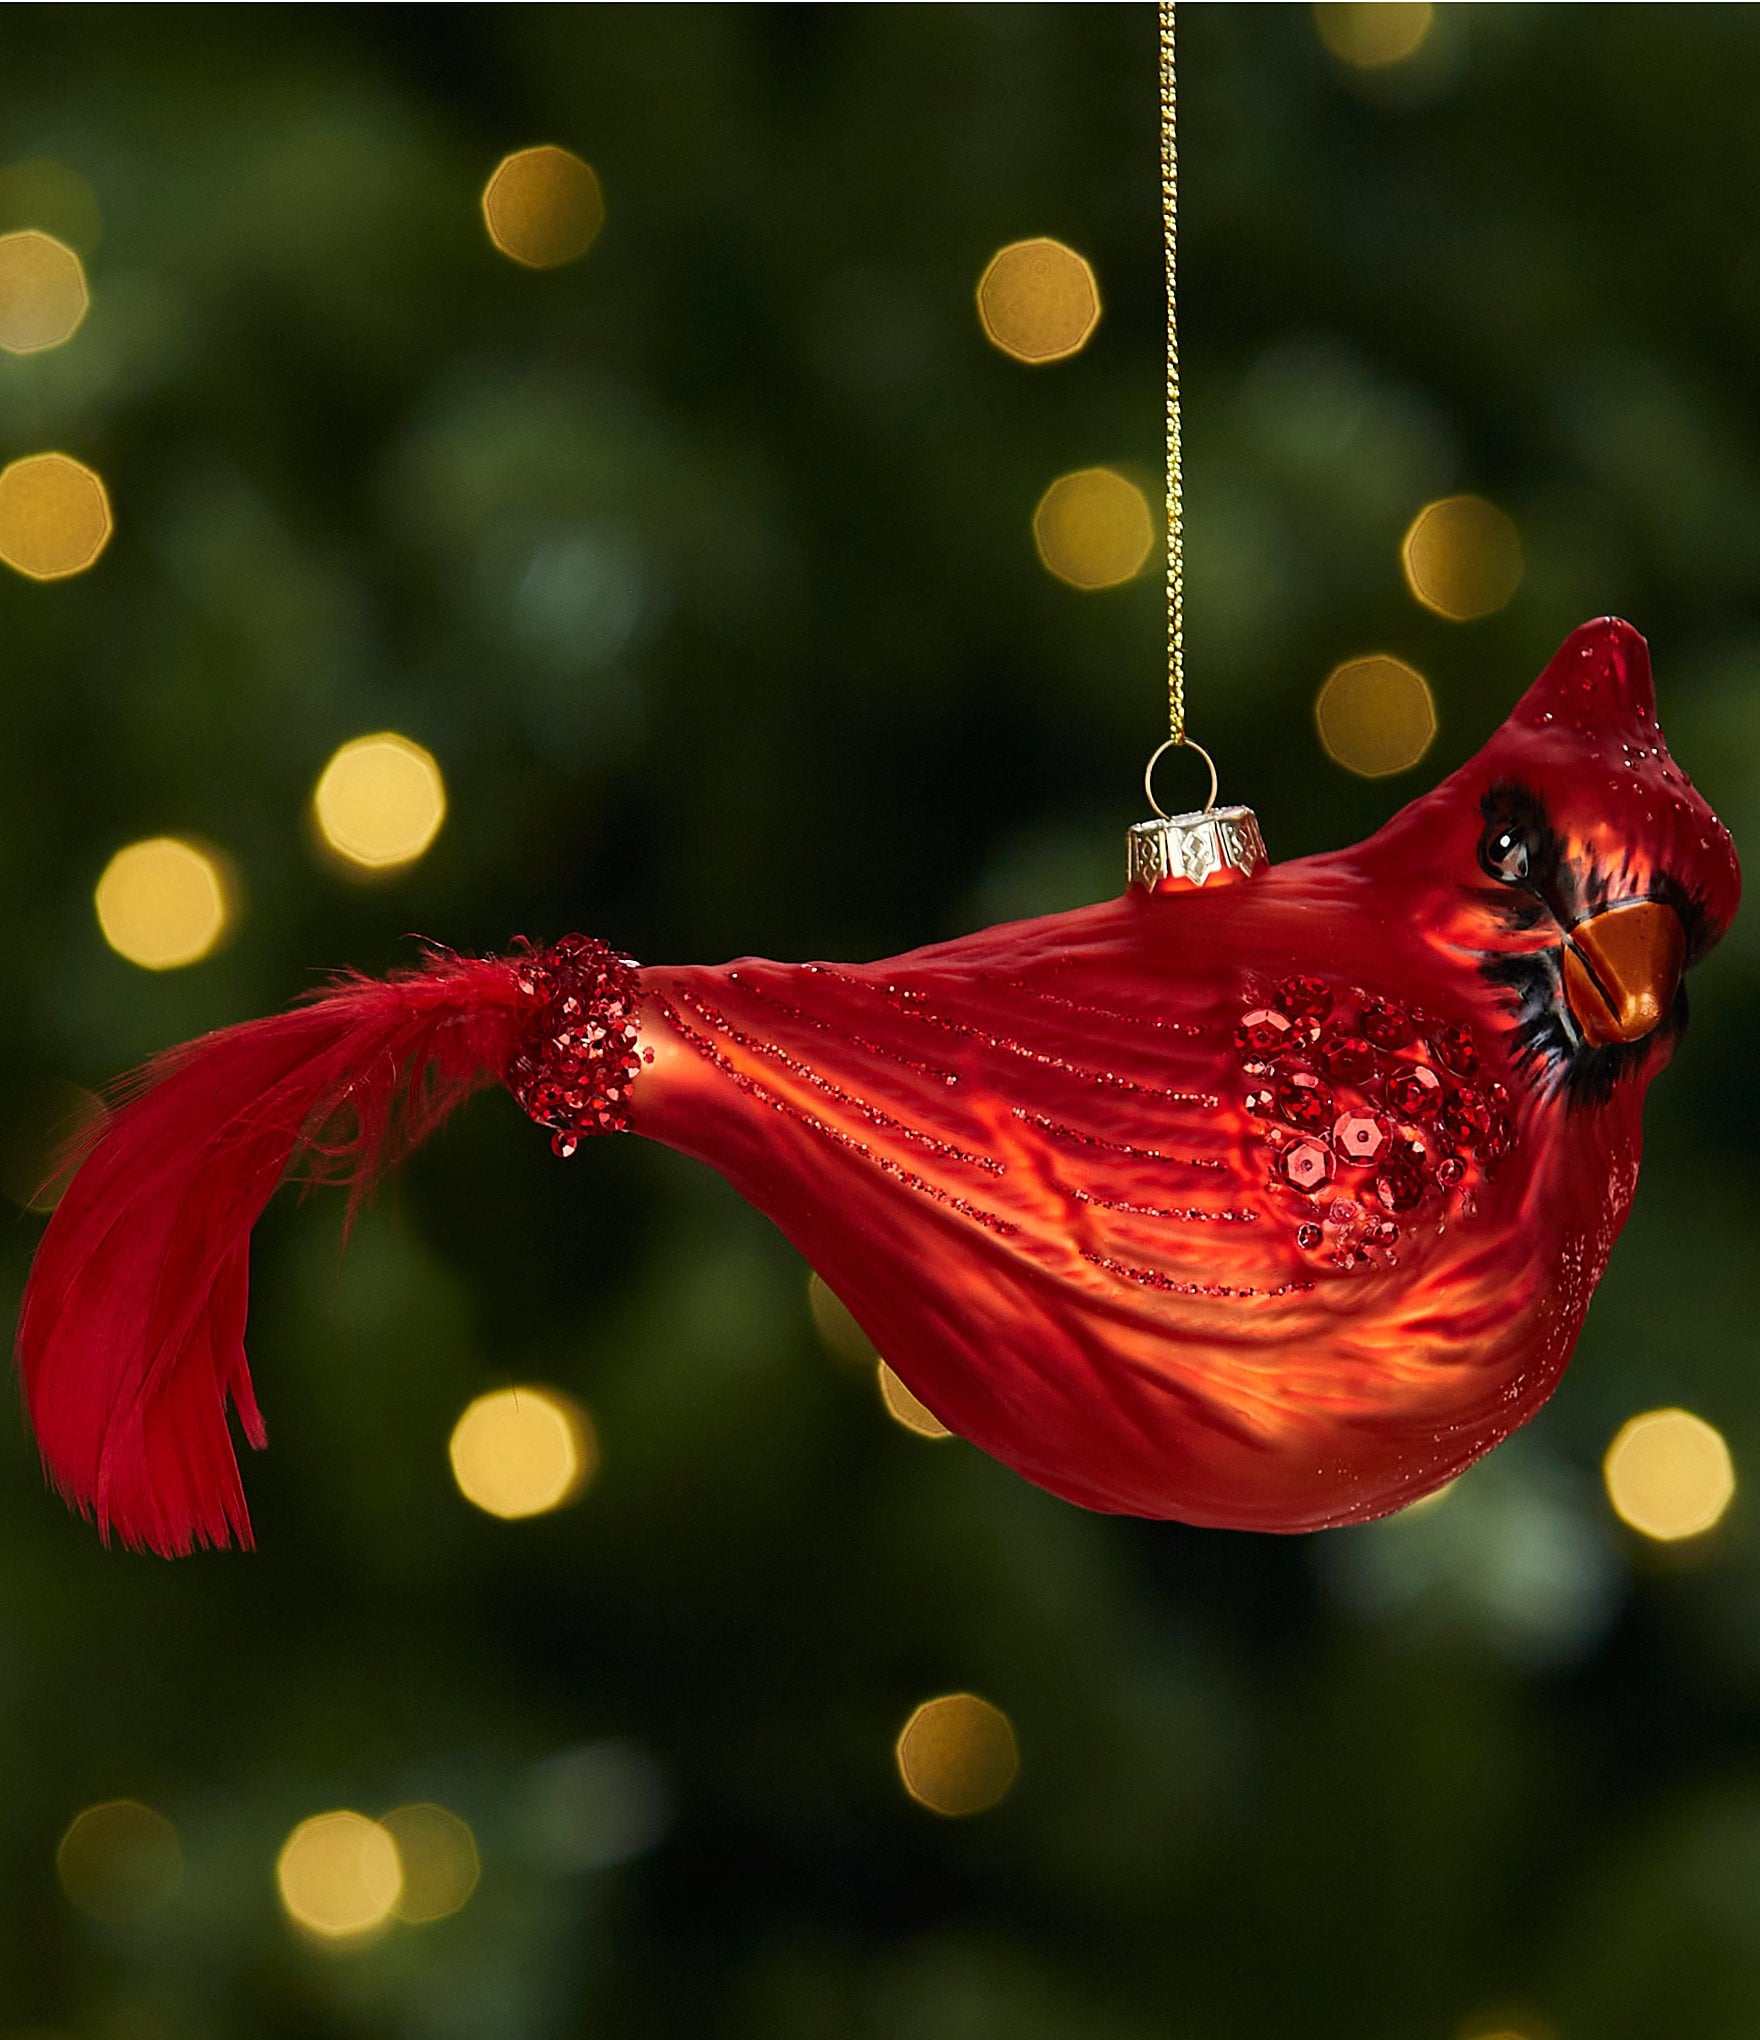 https://dimg.dillards.com/is/image/DillardsZoom/zoom/trimsetter-highland-holiday-collection-feathered-tail-cardinal-glass-ornament/00000000_zi_20390936.jpg